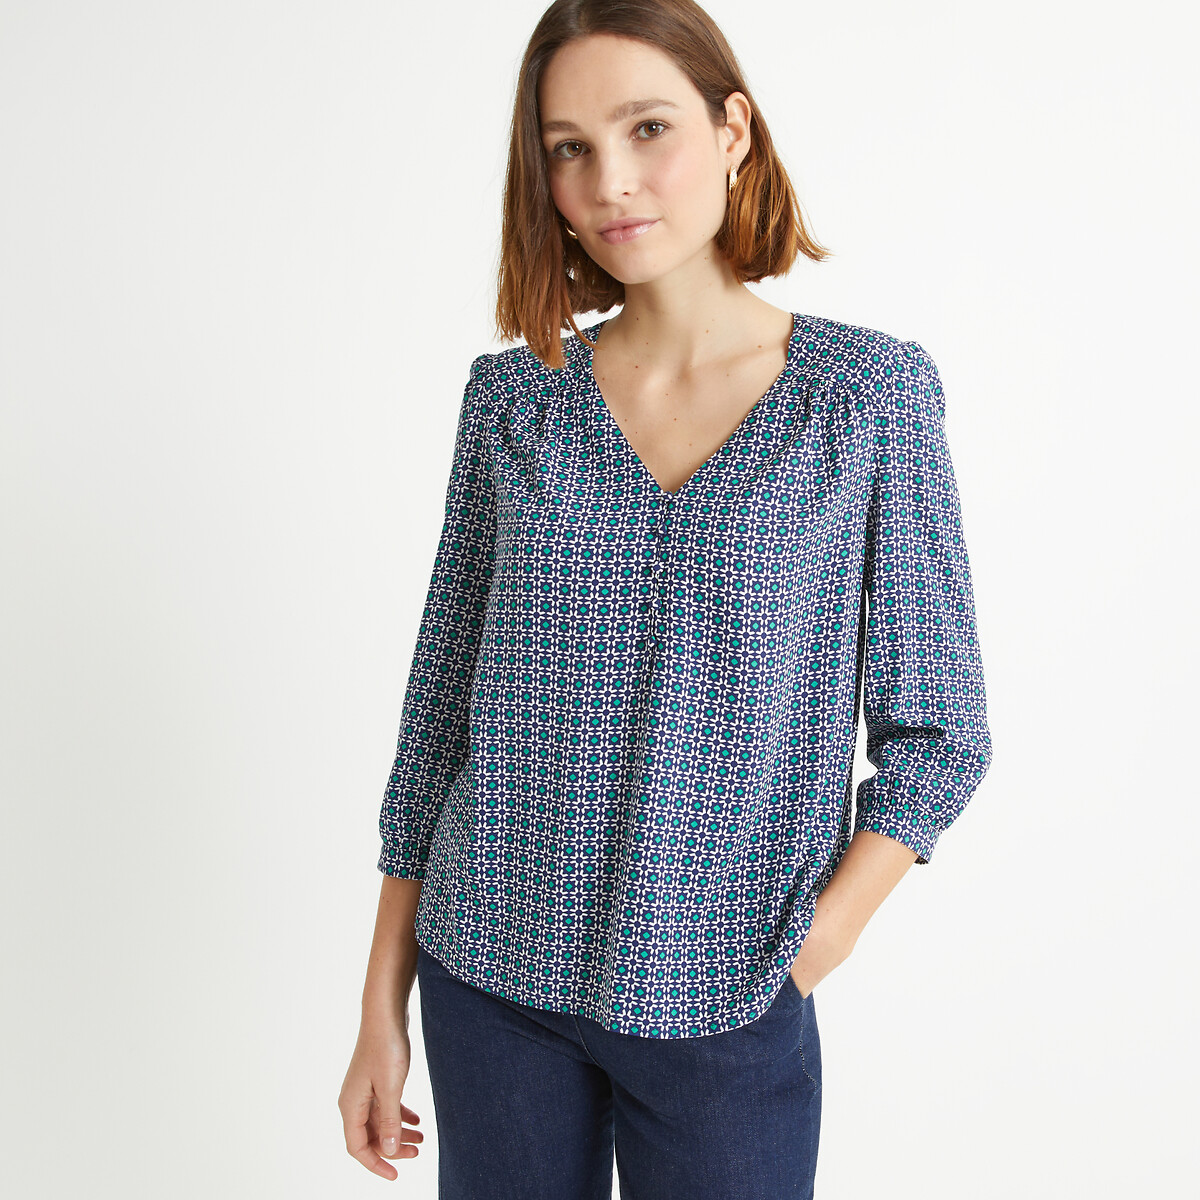 Graphic Print Blouse with V-Neck and 3/4 Length Sleeves